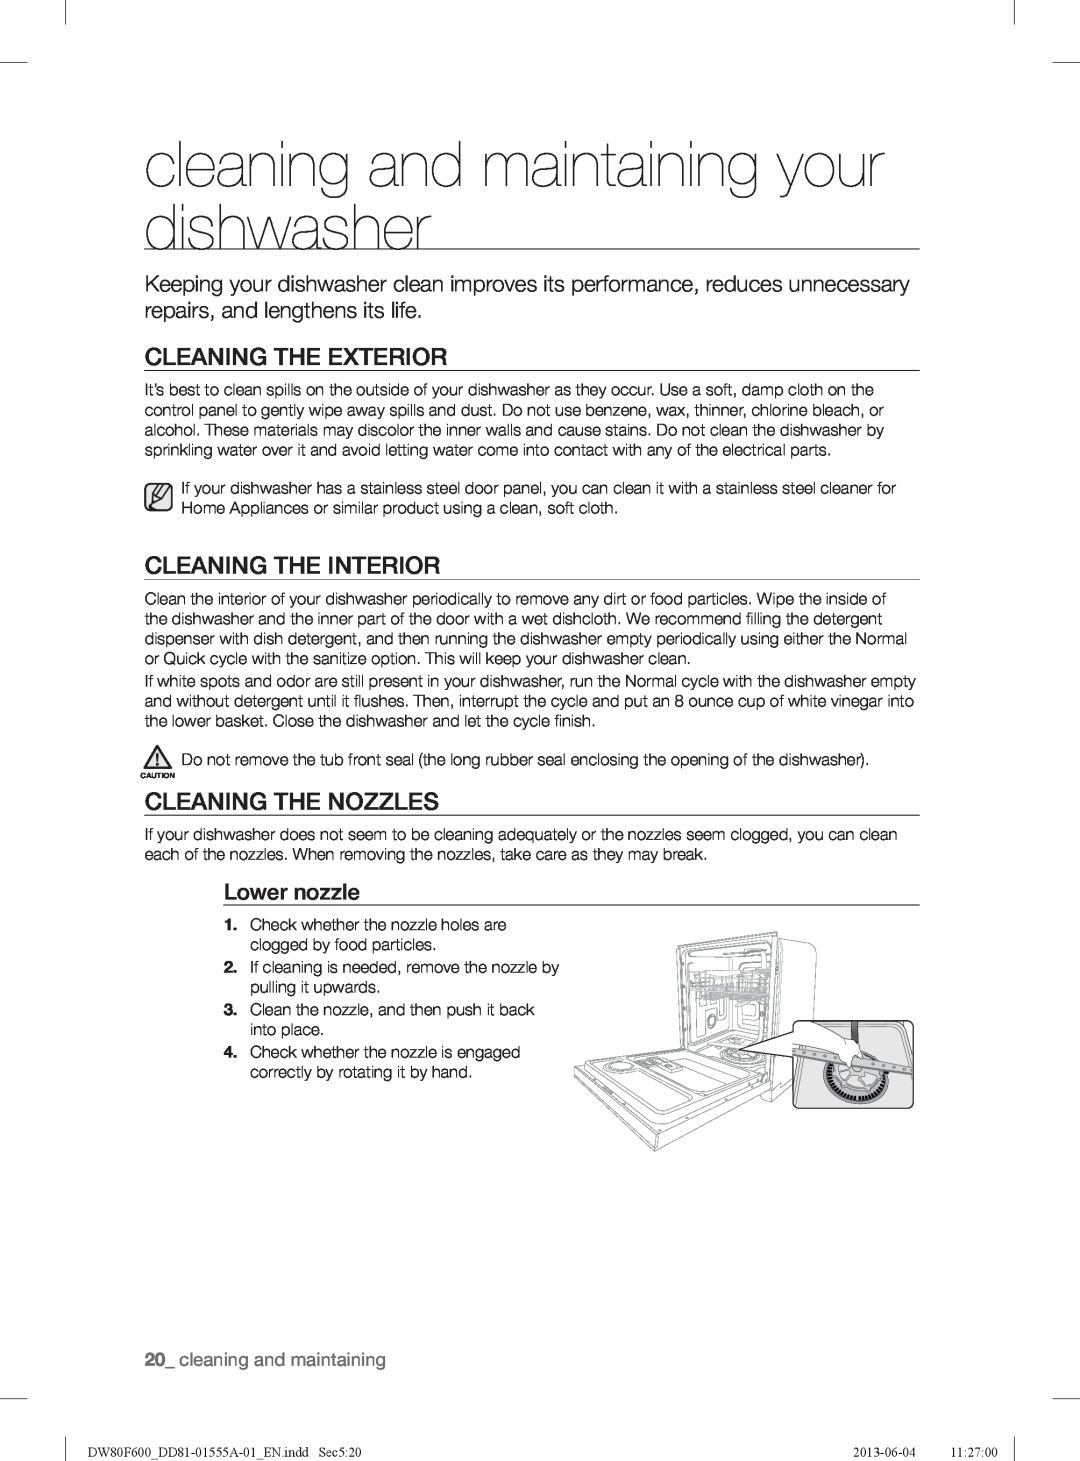 Samsung DW80F600UTS cleaning and maintaining your dishwasher, Cleaning The Exterior, Cleaning The Interior, Lower nozzle 